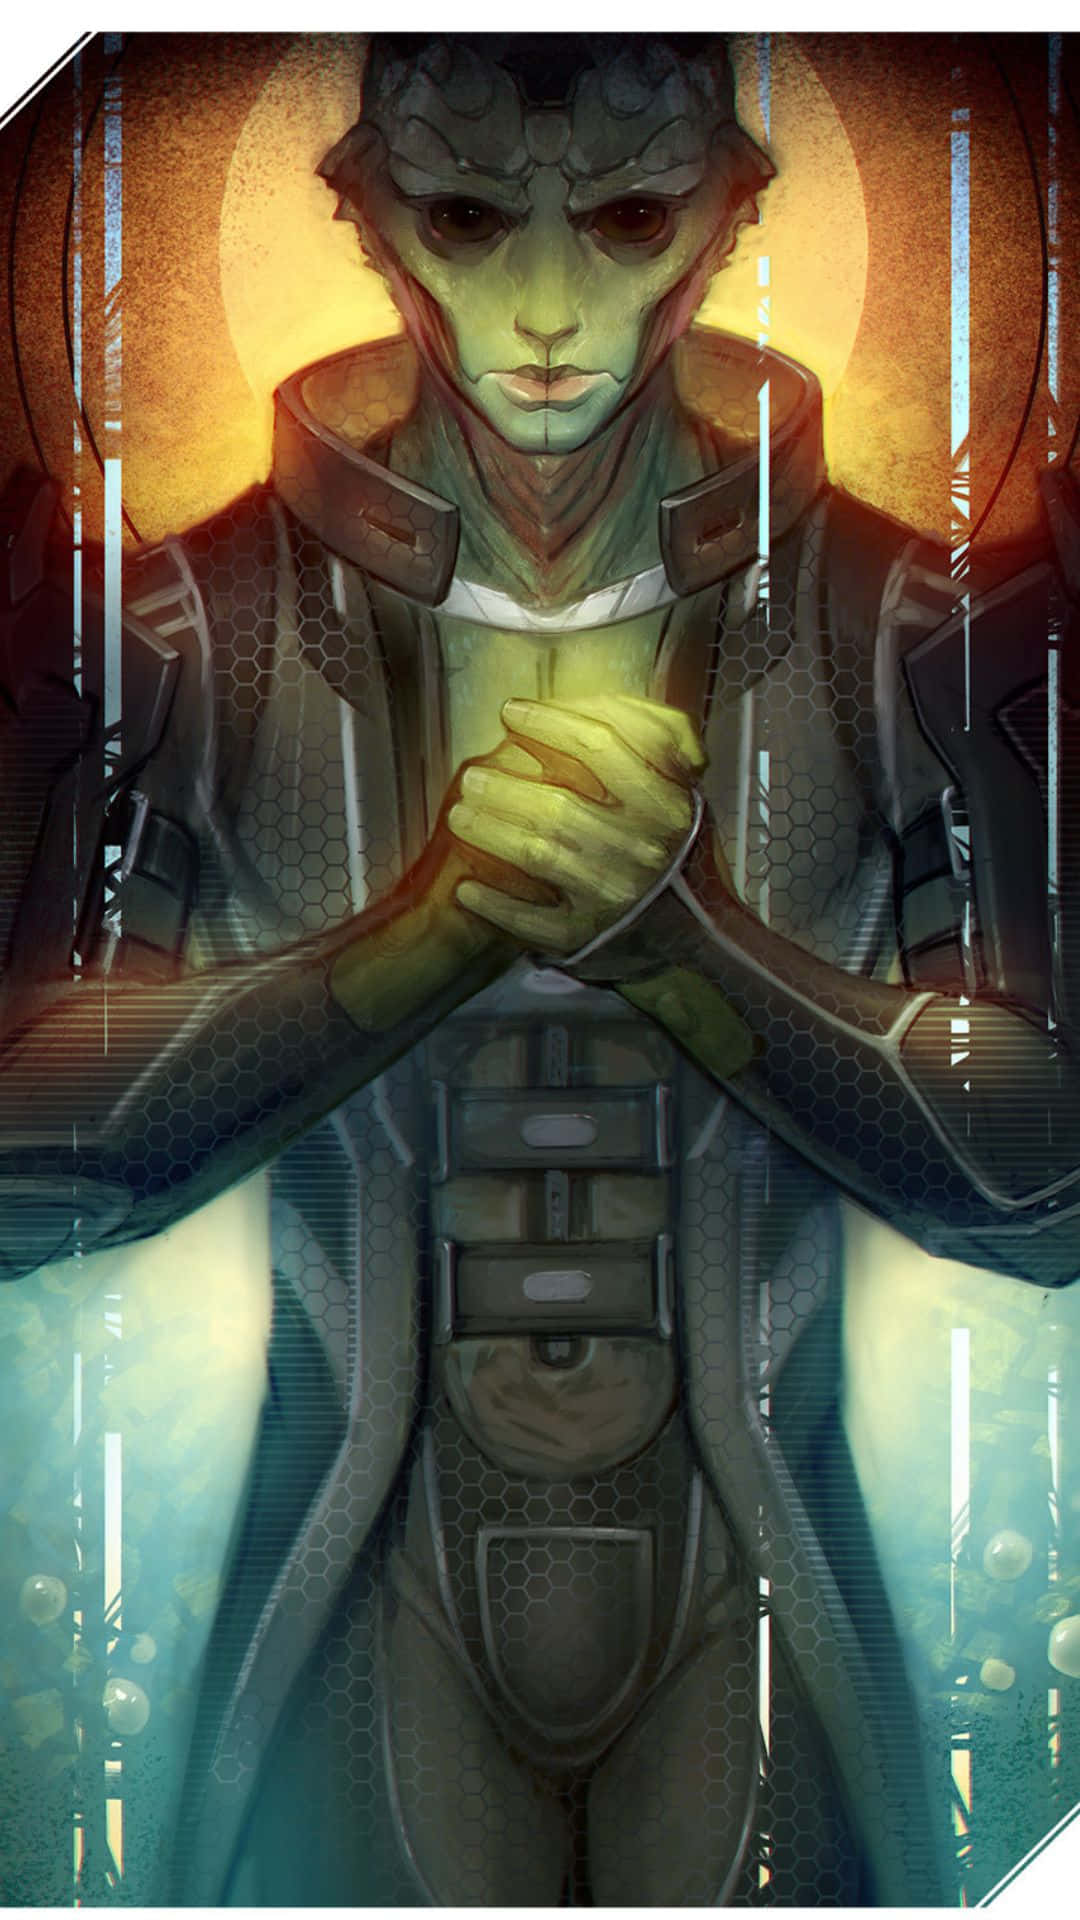 Thane Krios: Drell Assassin in Action Wallpaper